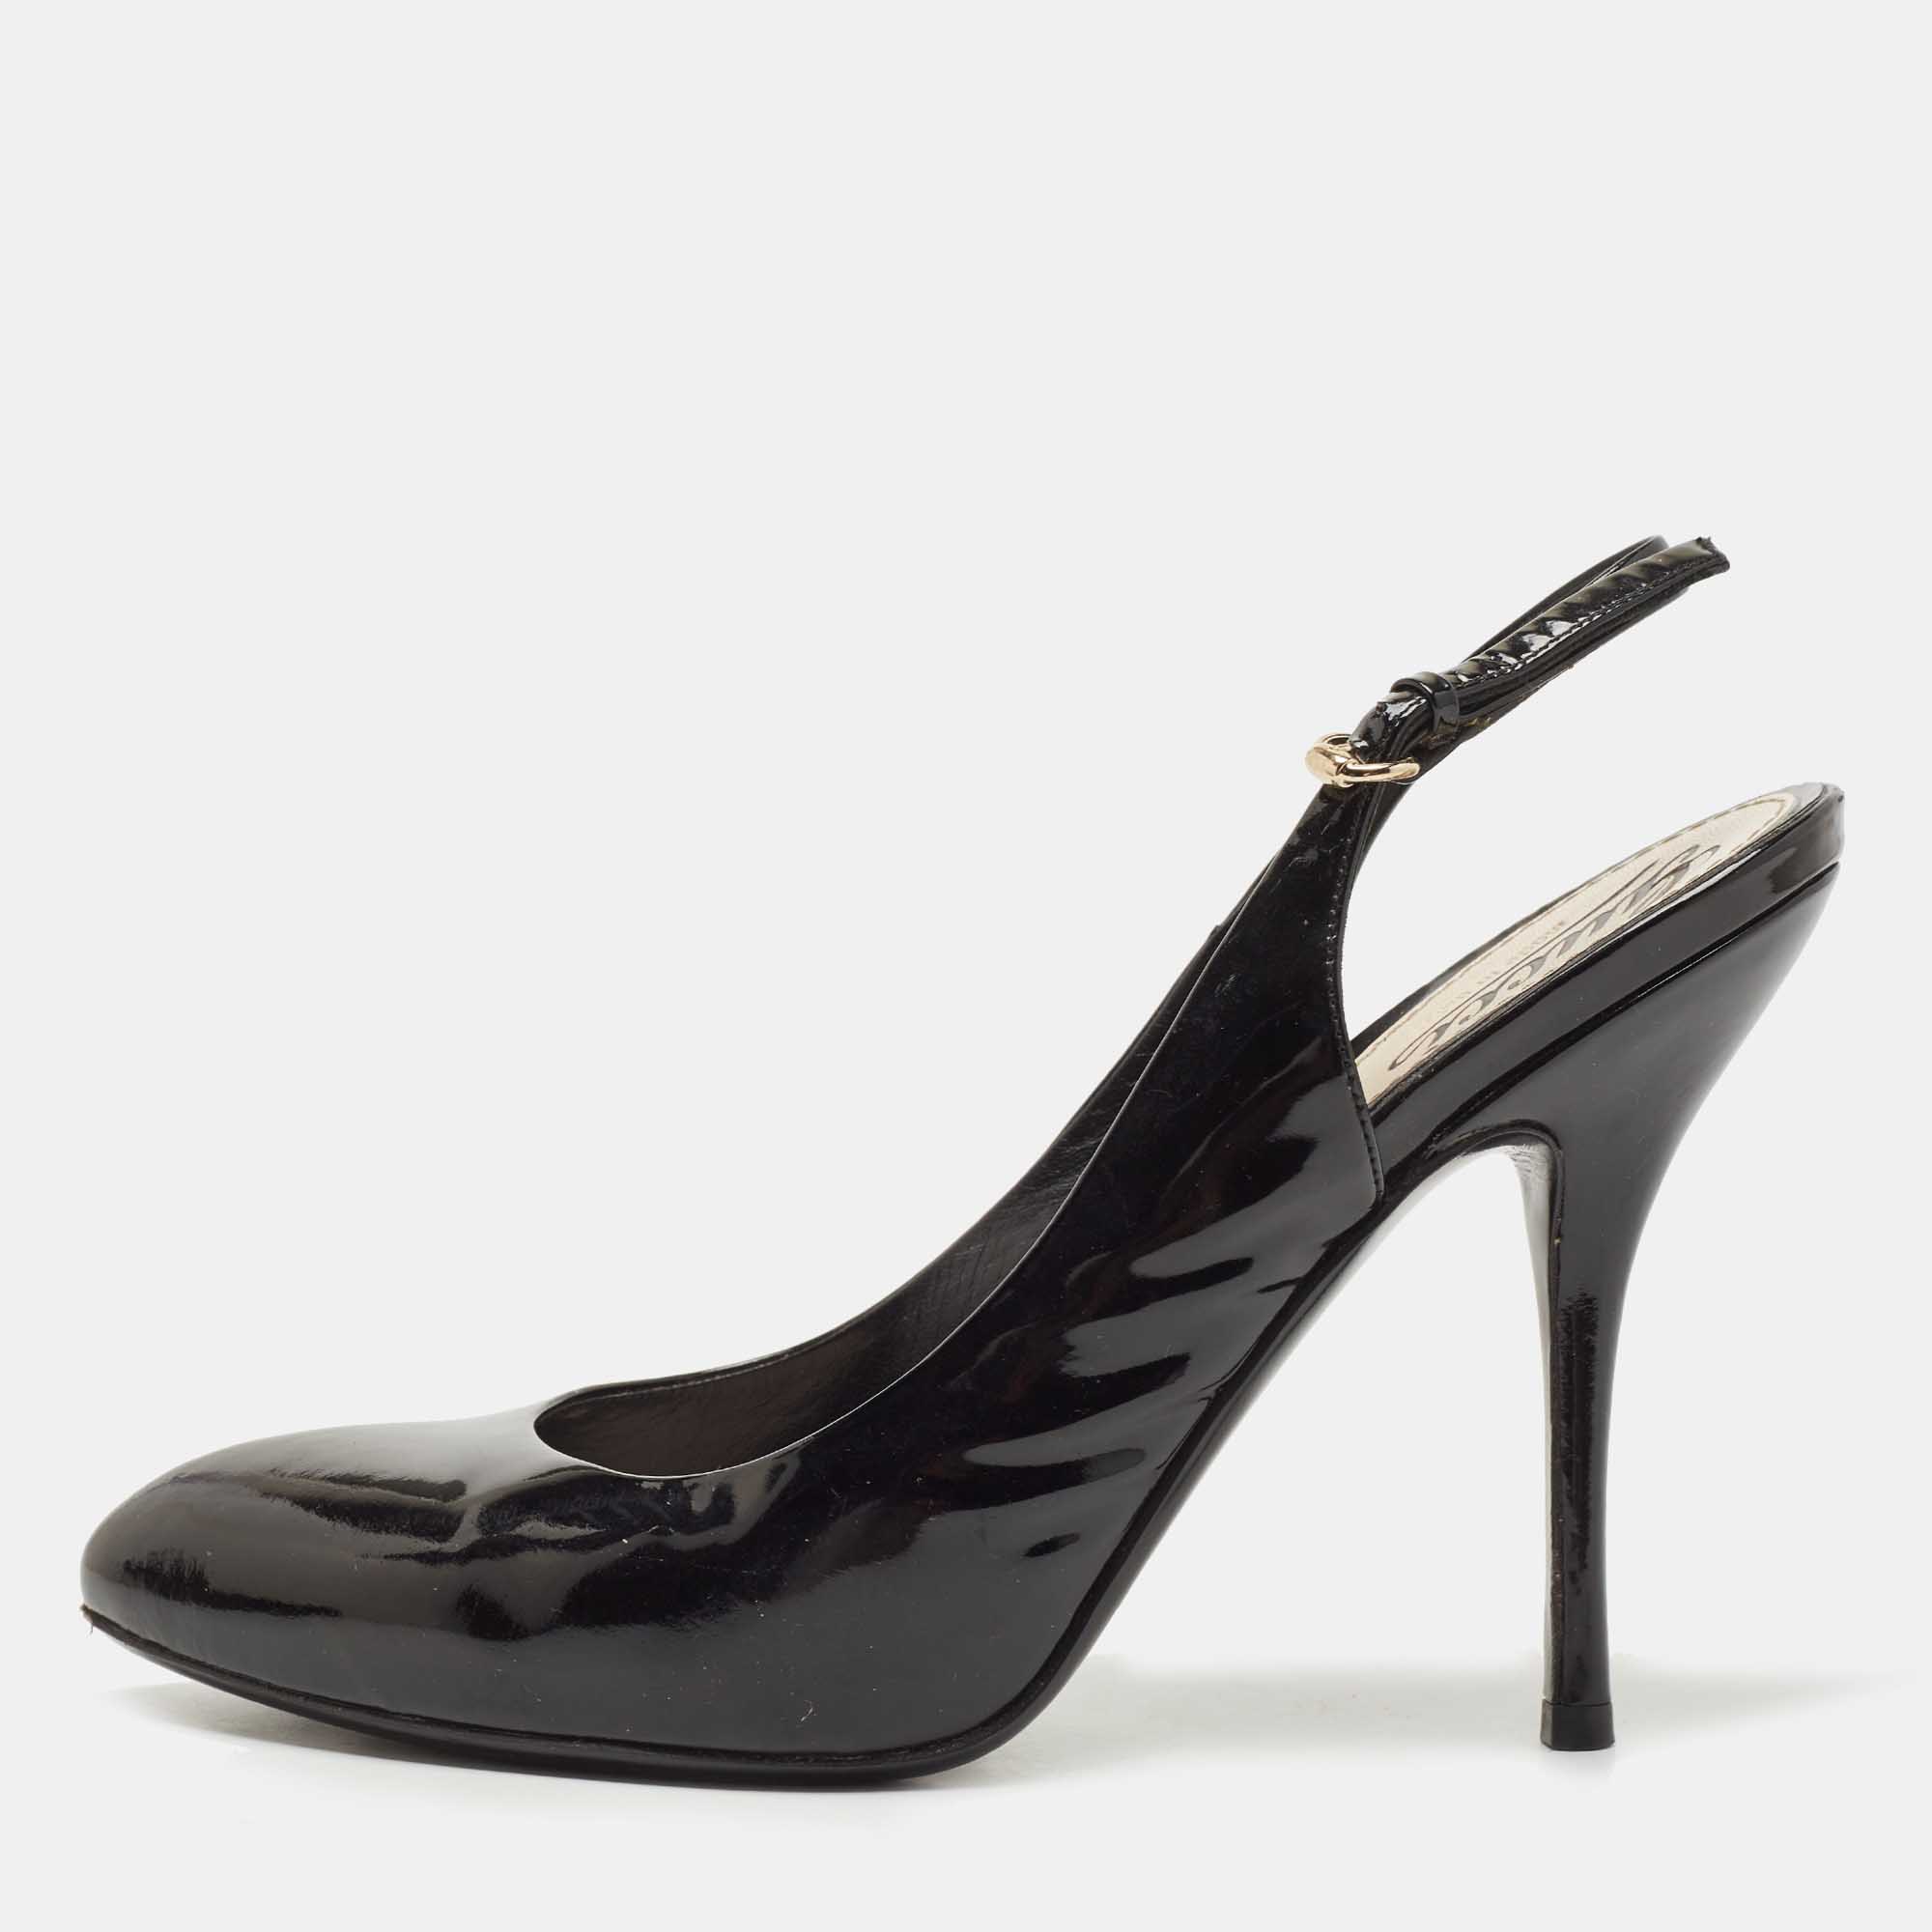 Pre-owned Gucci Black Patent Leather Slingback Pumps Size 38.5